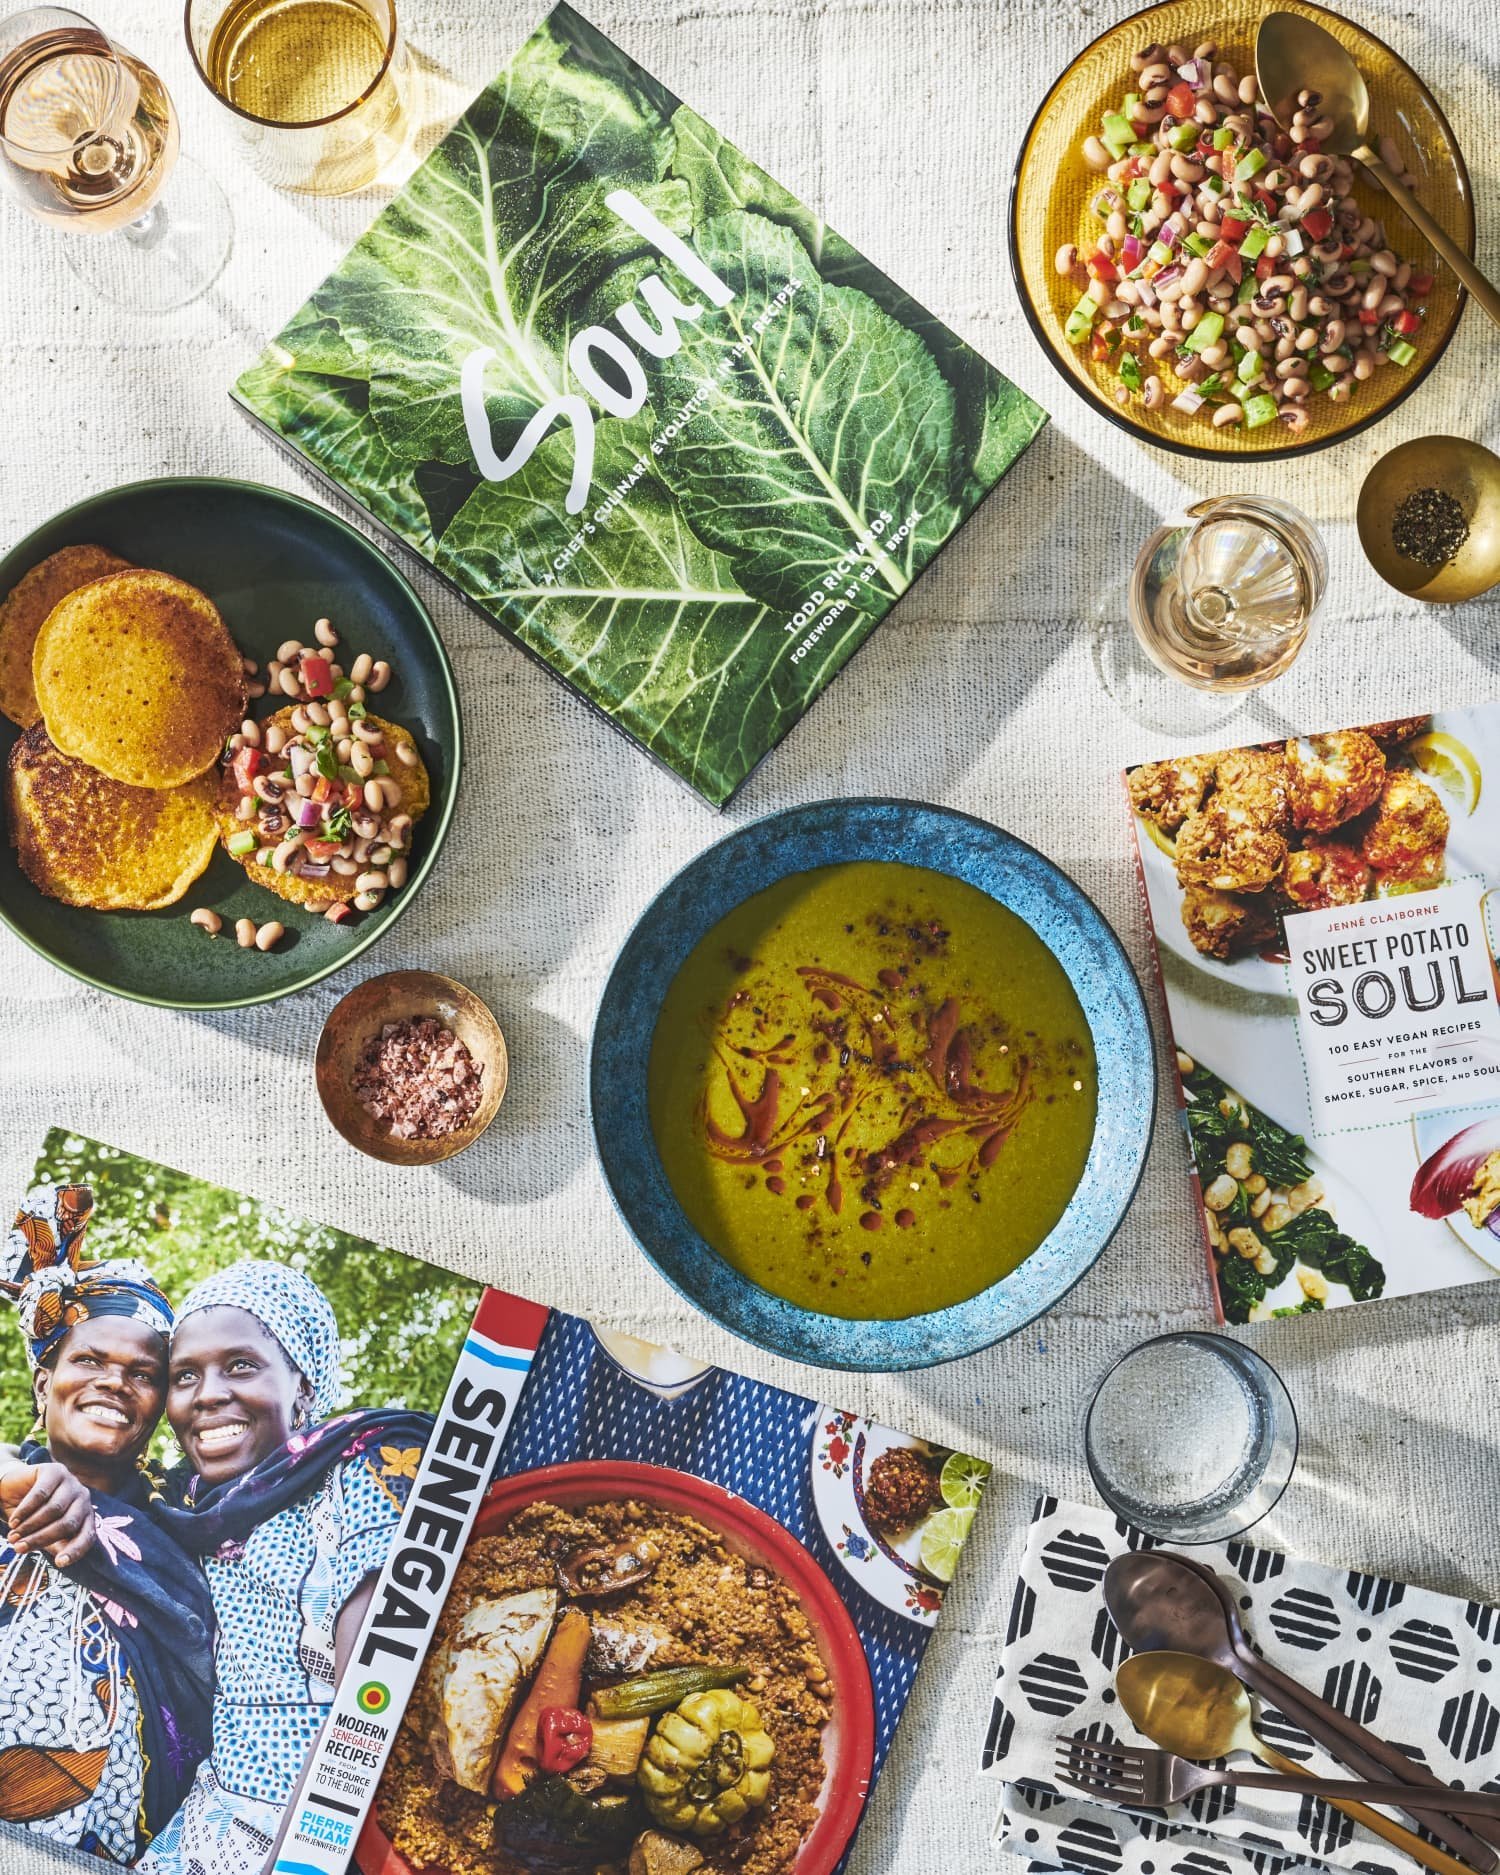 The Legacy of Plant-Based Eating in the African Diaspora